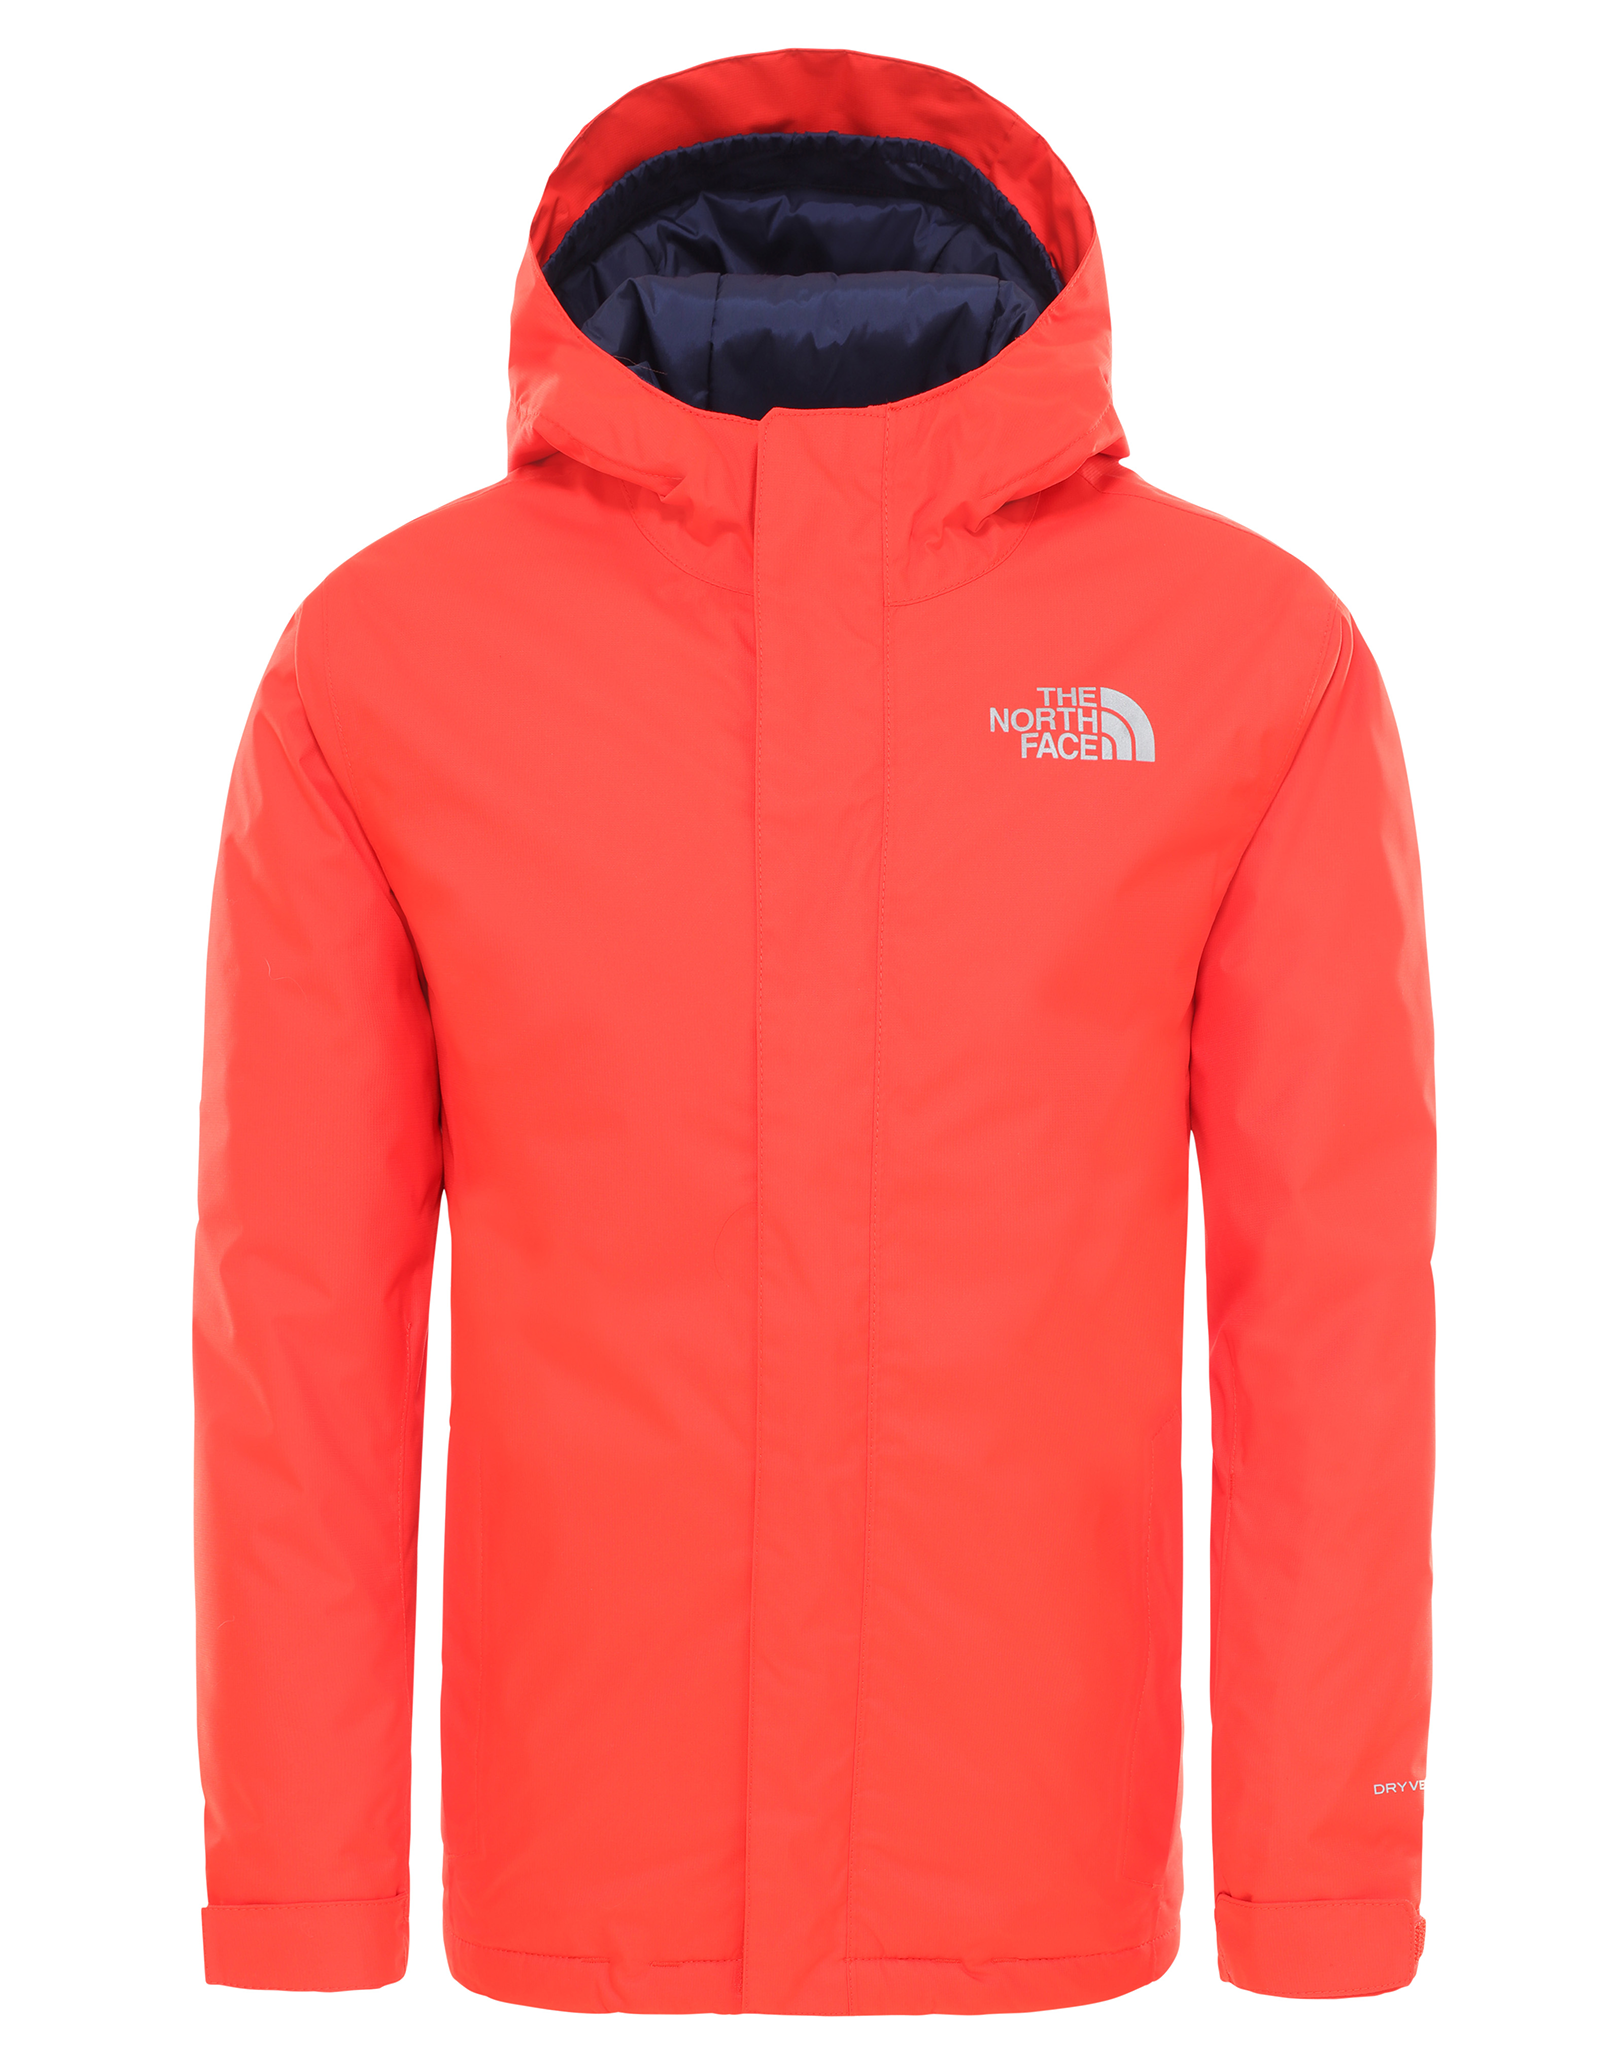 colourful north face jacket